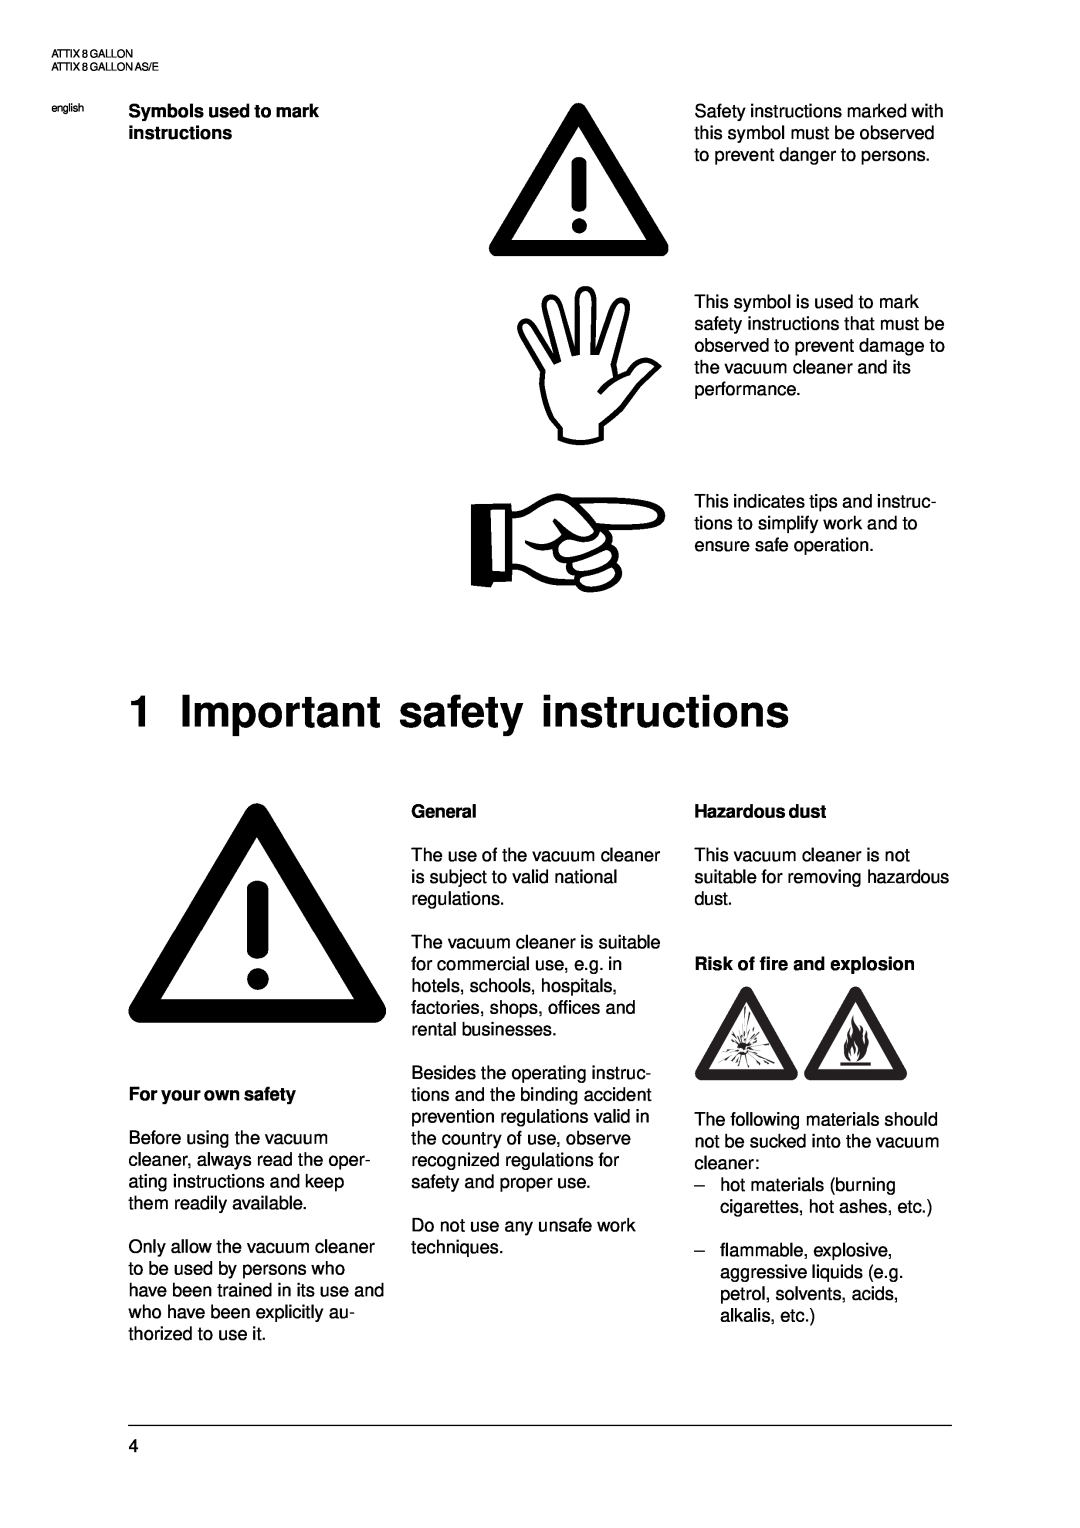 Nilfisk-ALTO 8 GALLON manual Important safety instructions, Symbols used to mark instructions, For your own safety, General 